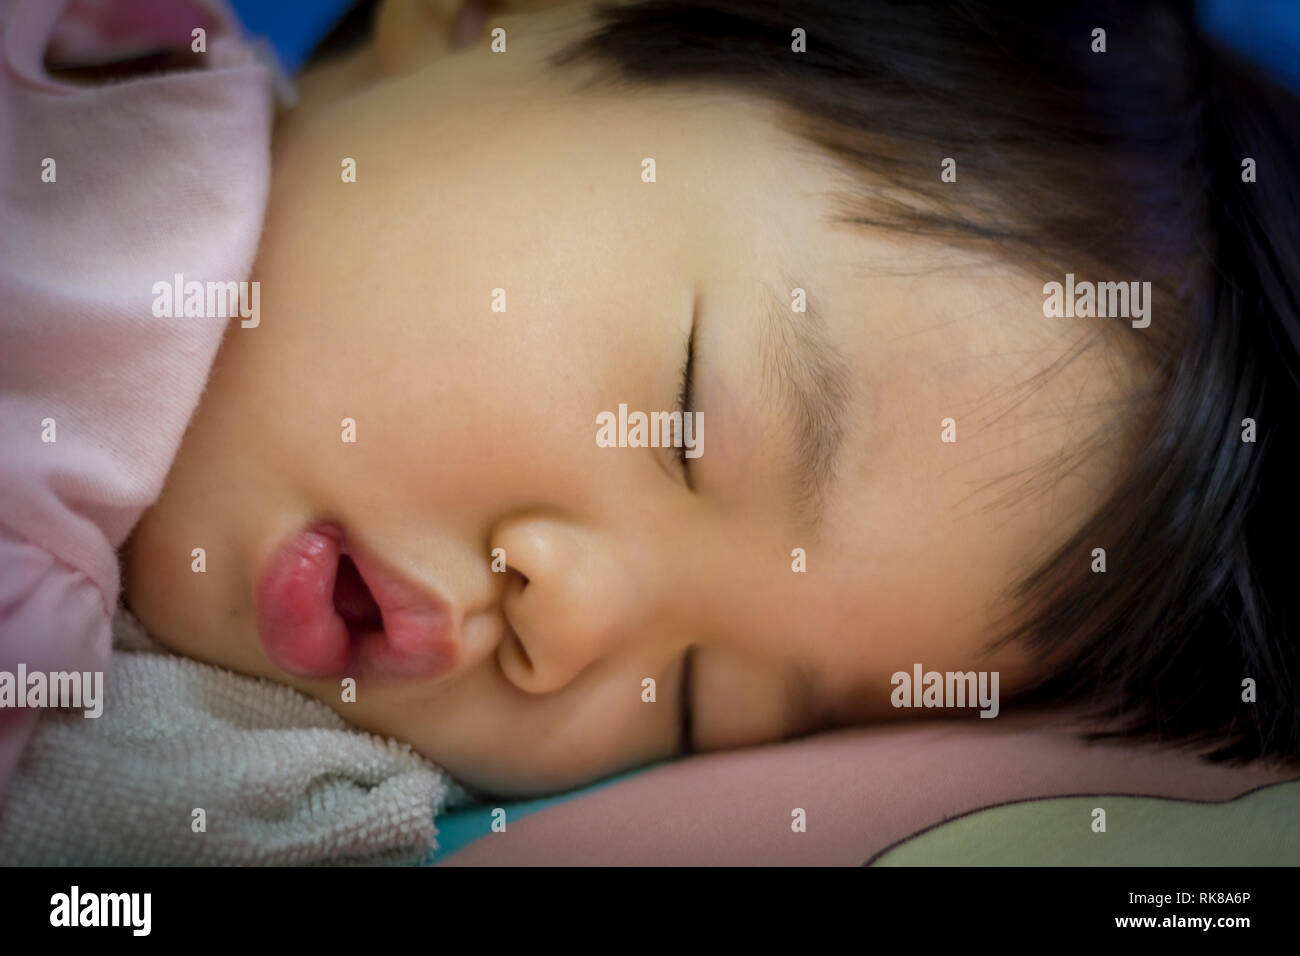 Cute Asian baby sleeping Banque D'Images